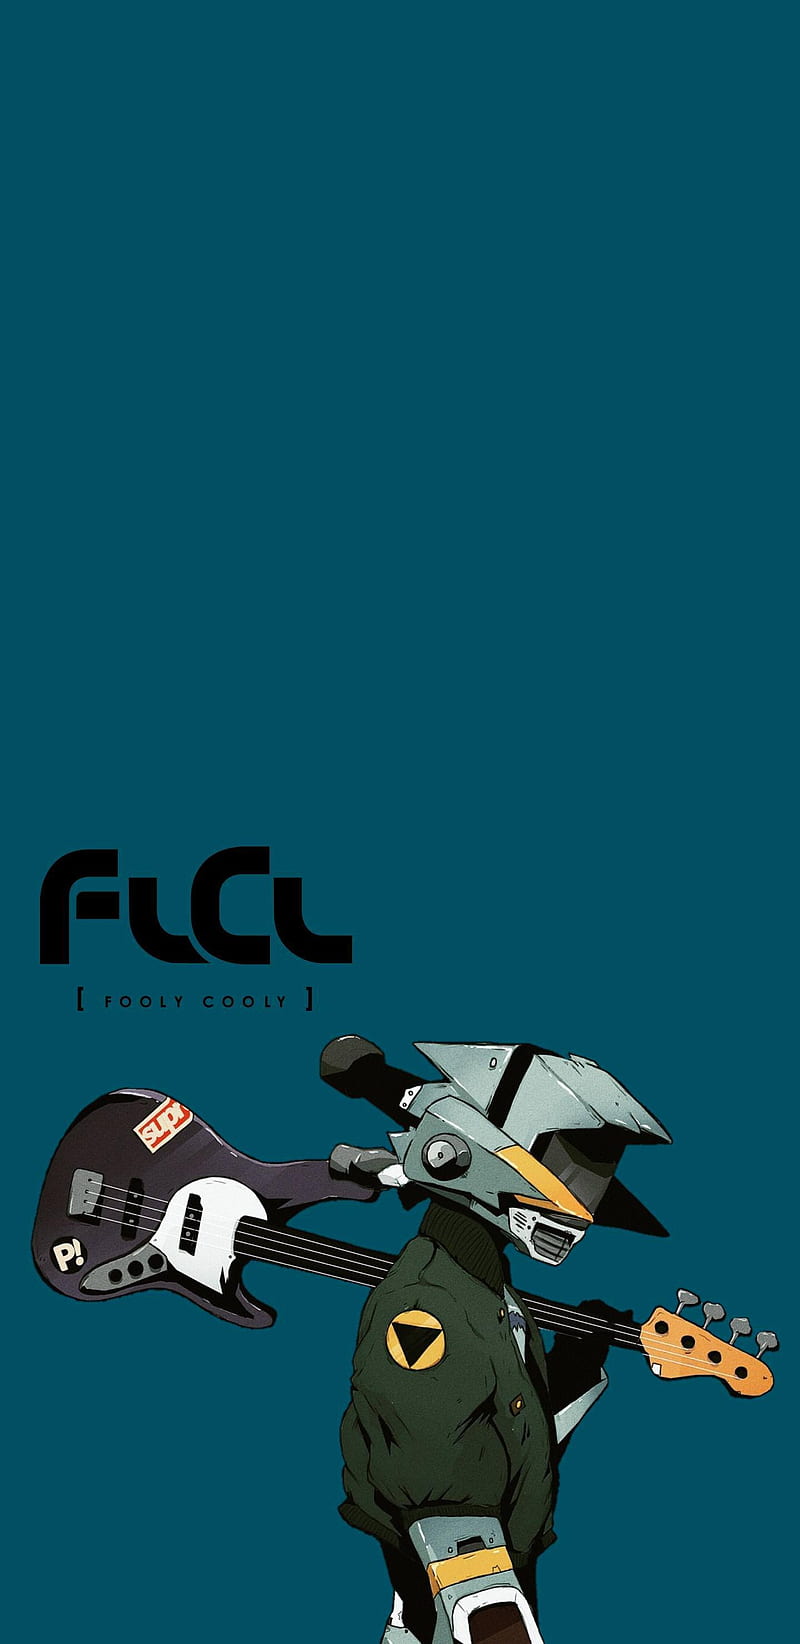 FLCL Grunge  Coming Soon  YouTube